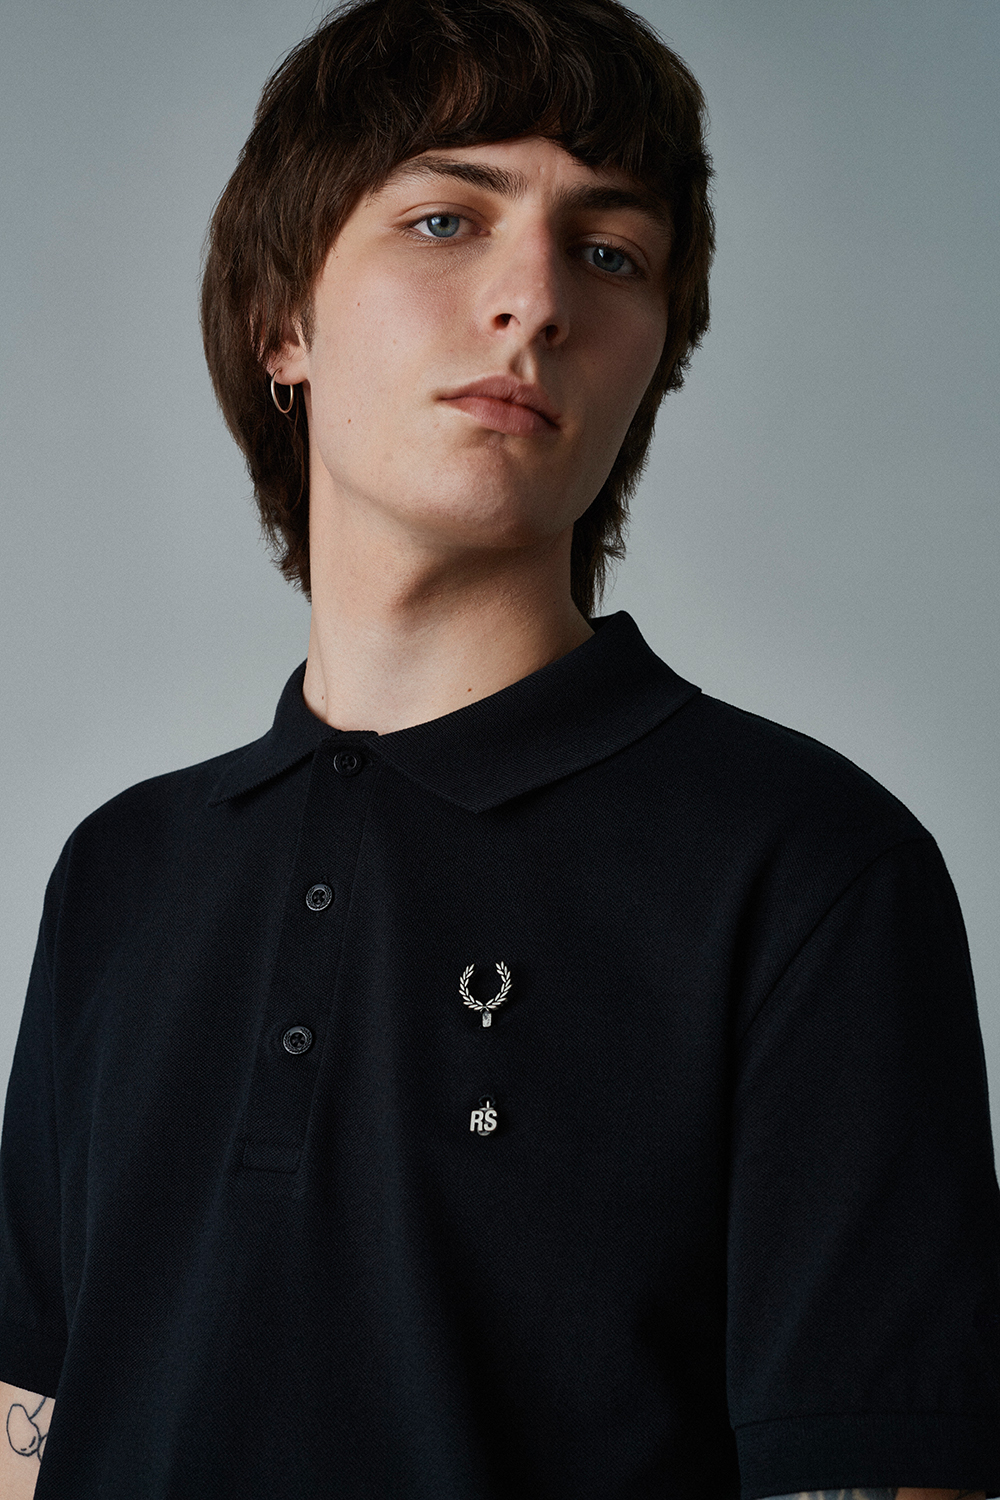 Geestig Orthodox Let op FRED PERRY COLLABORATES WITH RAF SIMONS - CRASH Magazine